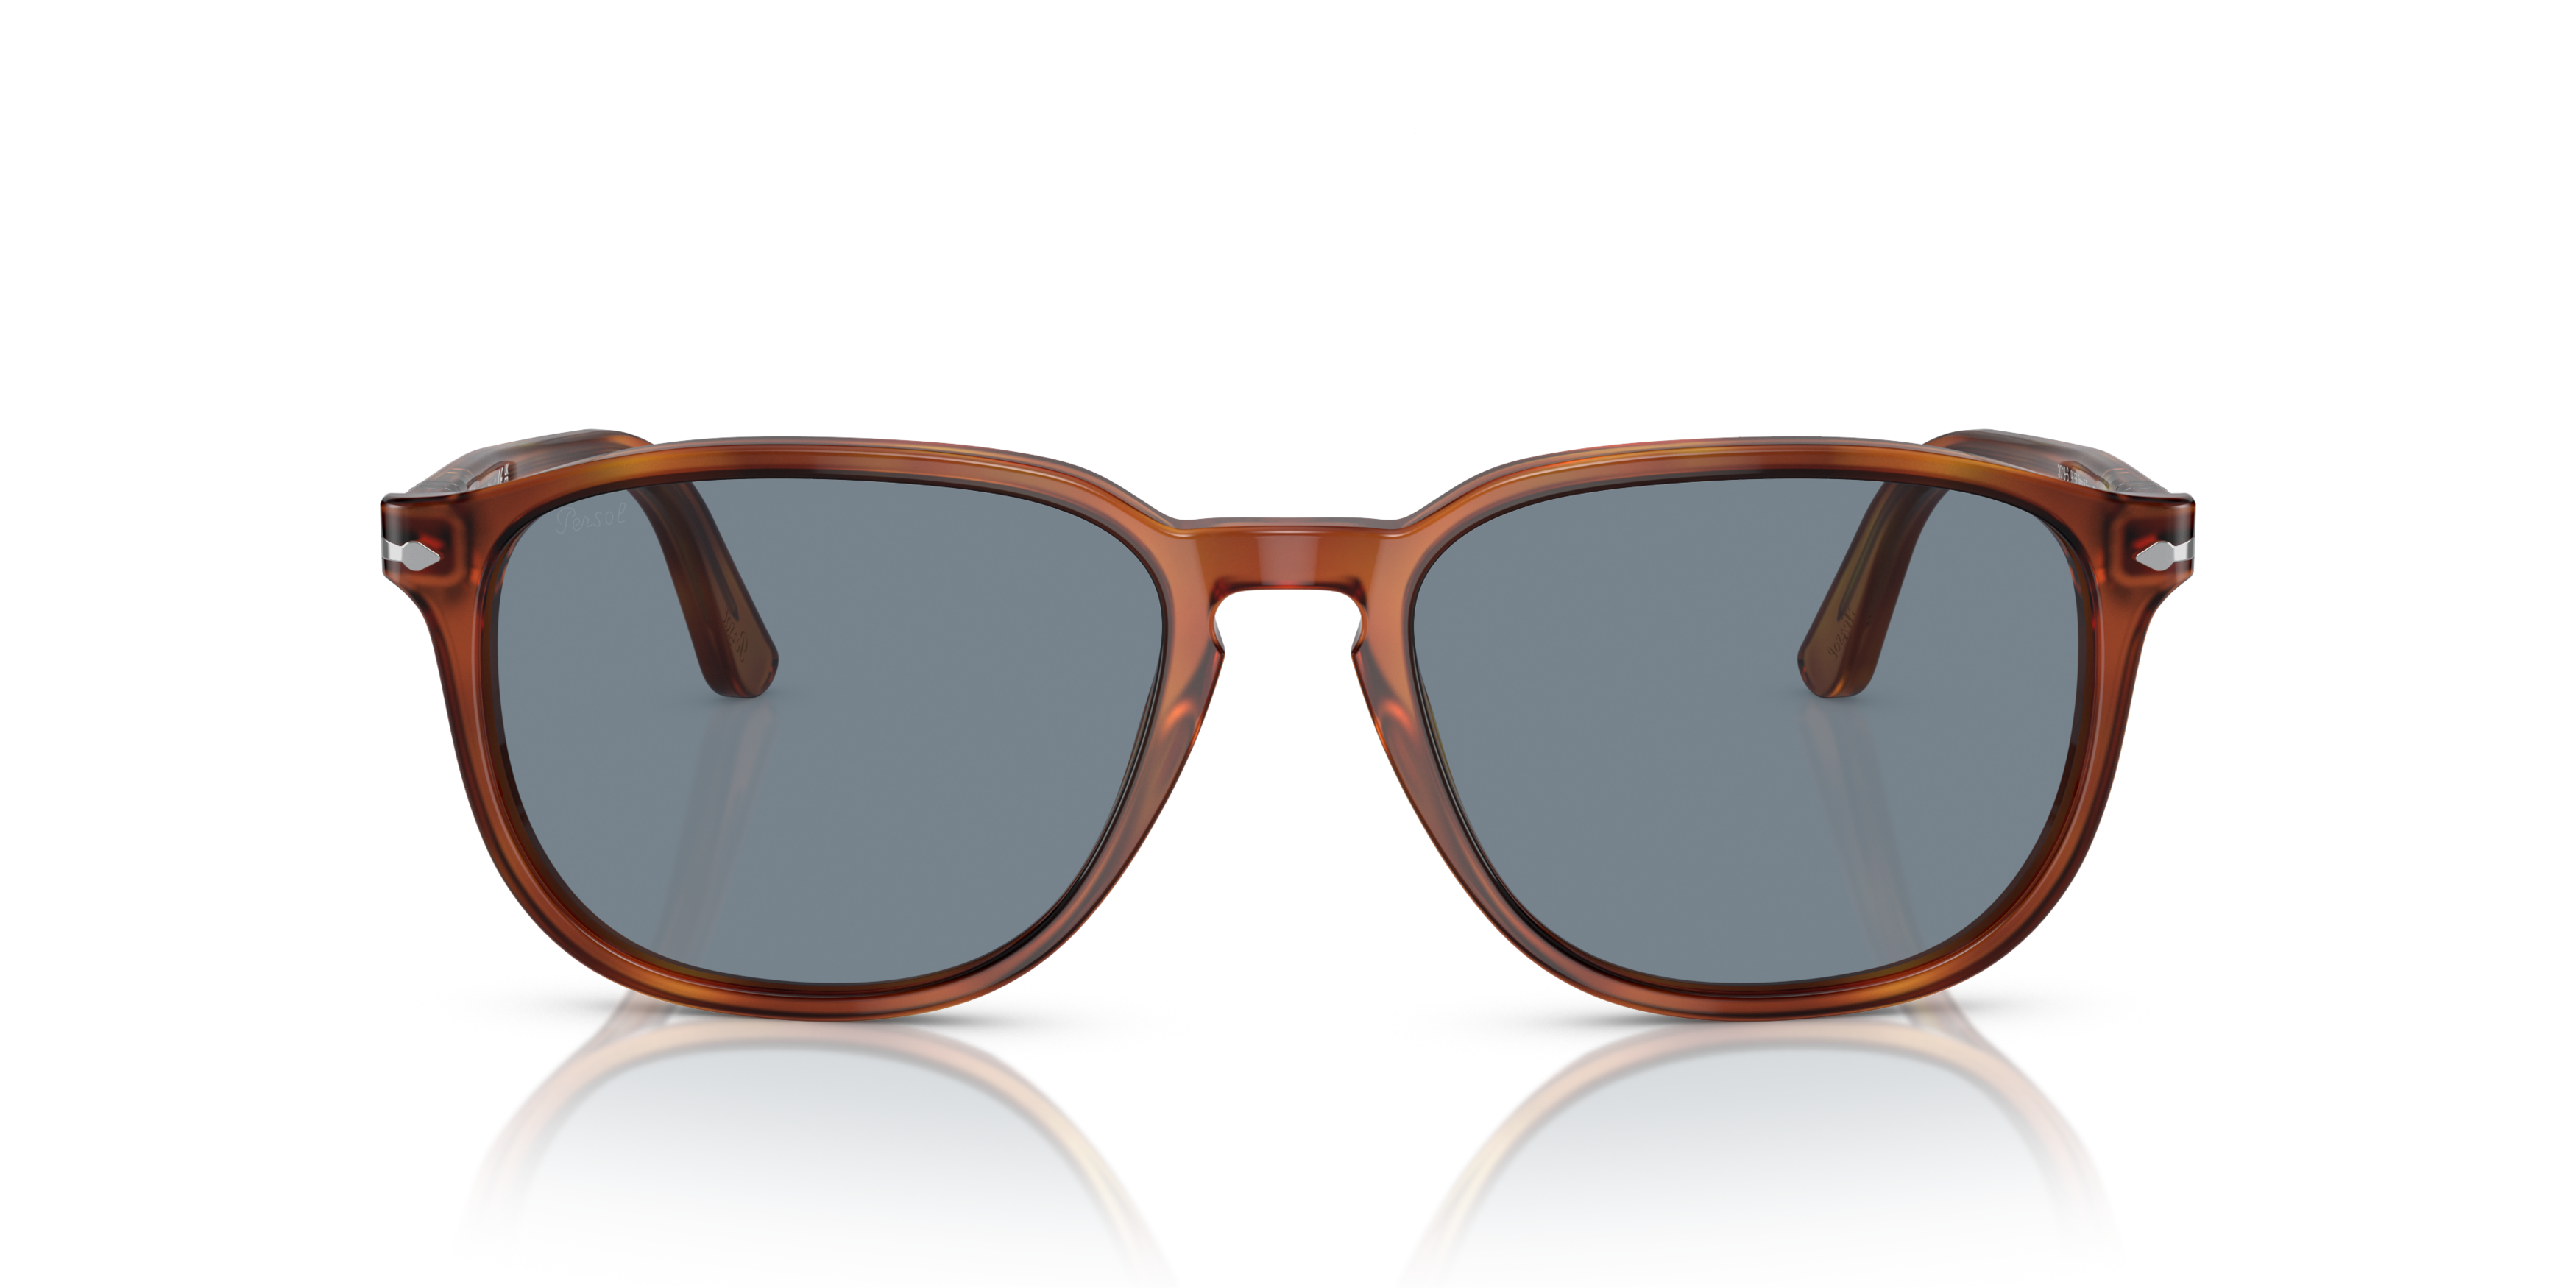 [products.image.front] Persol 0PO3019S 96/56